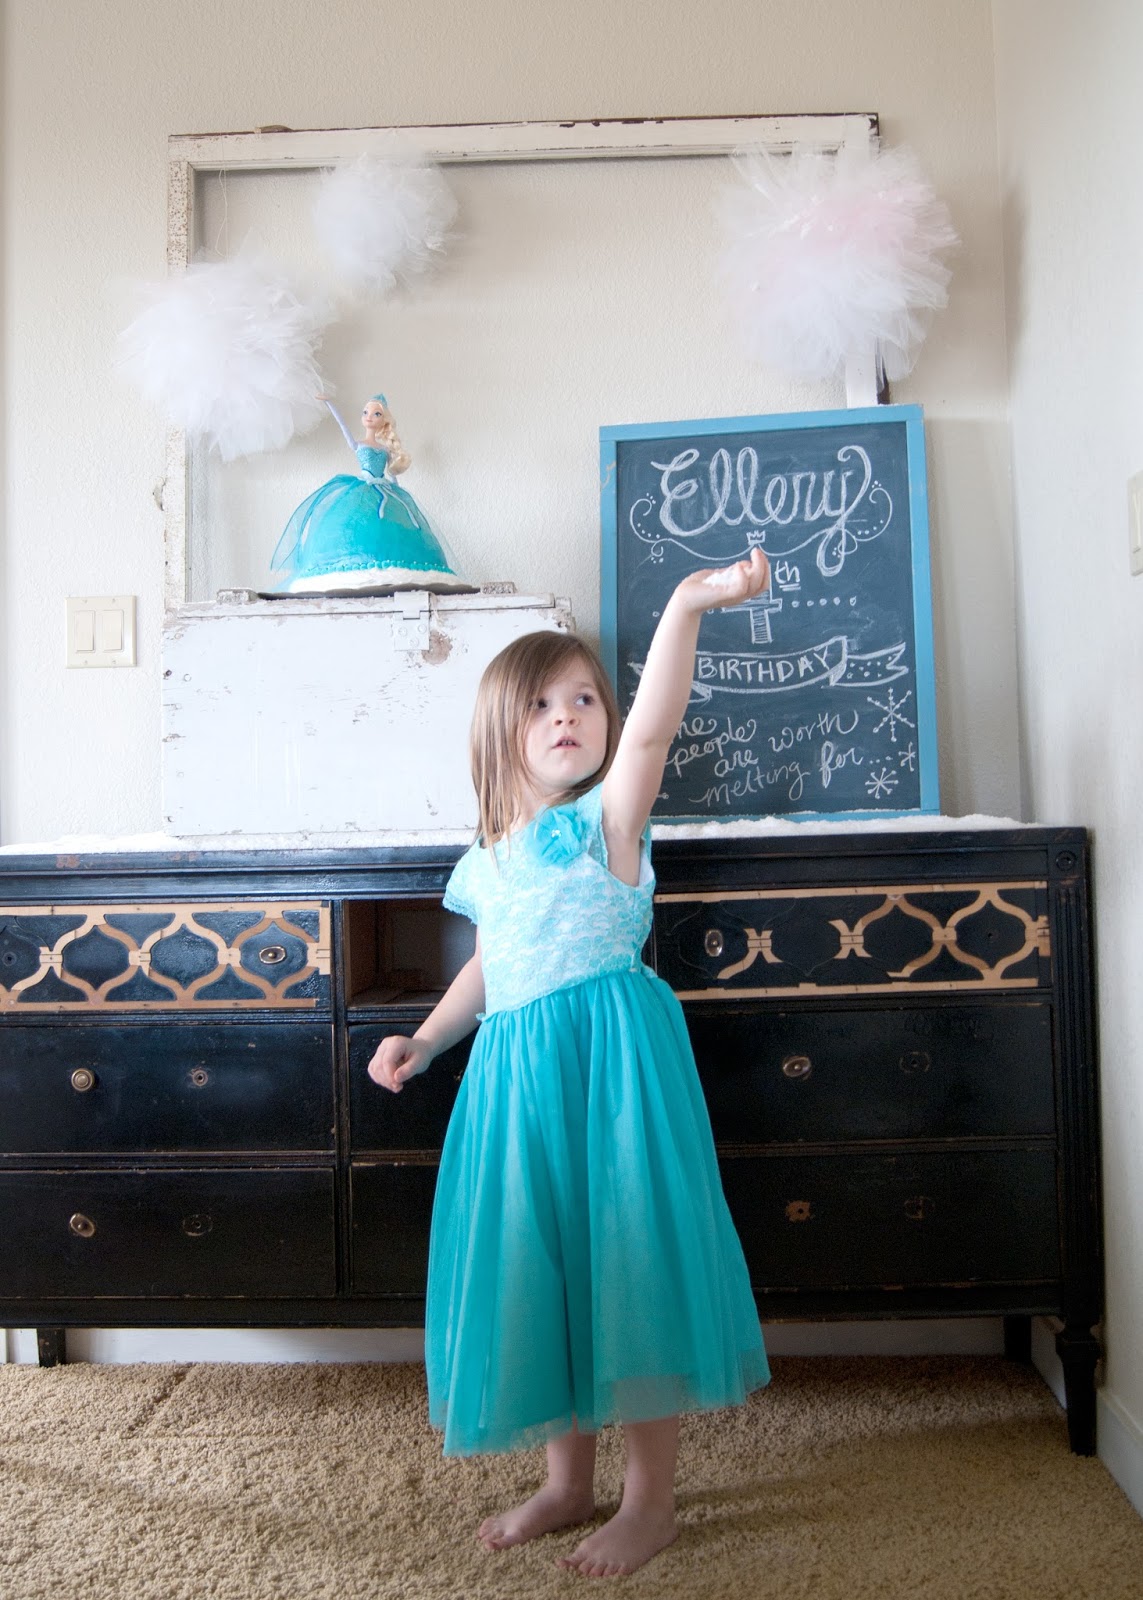 The birthday girl and the party decor - Frozen themed birthday party